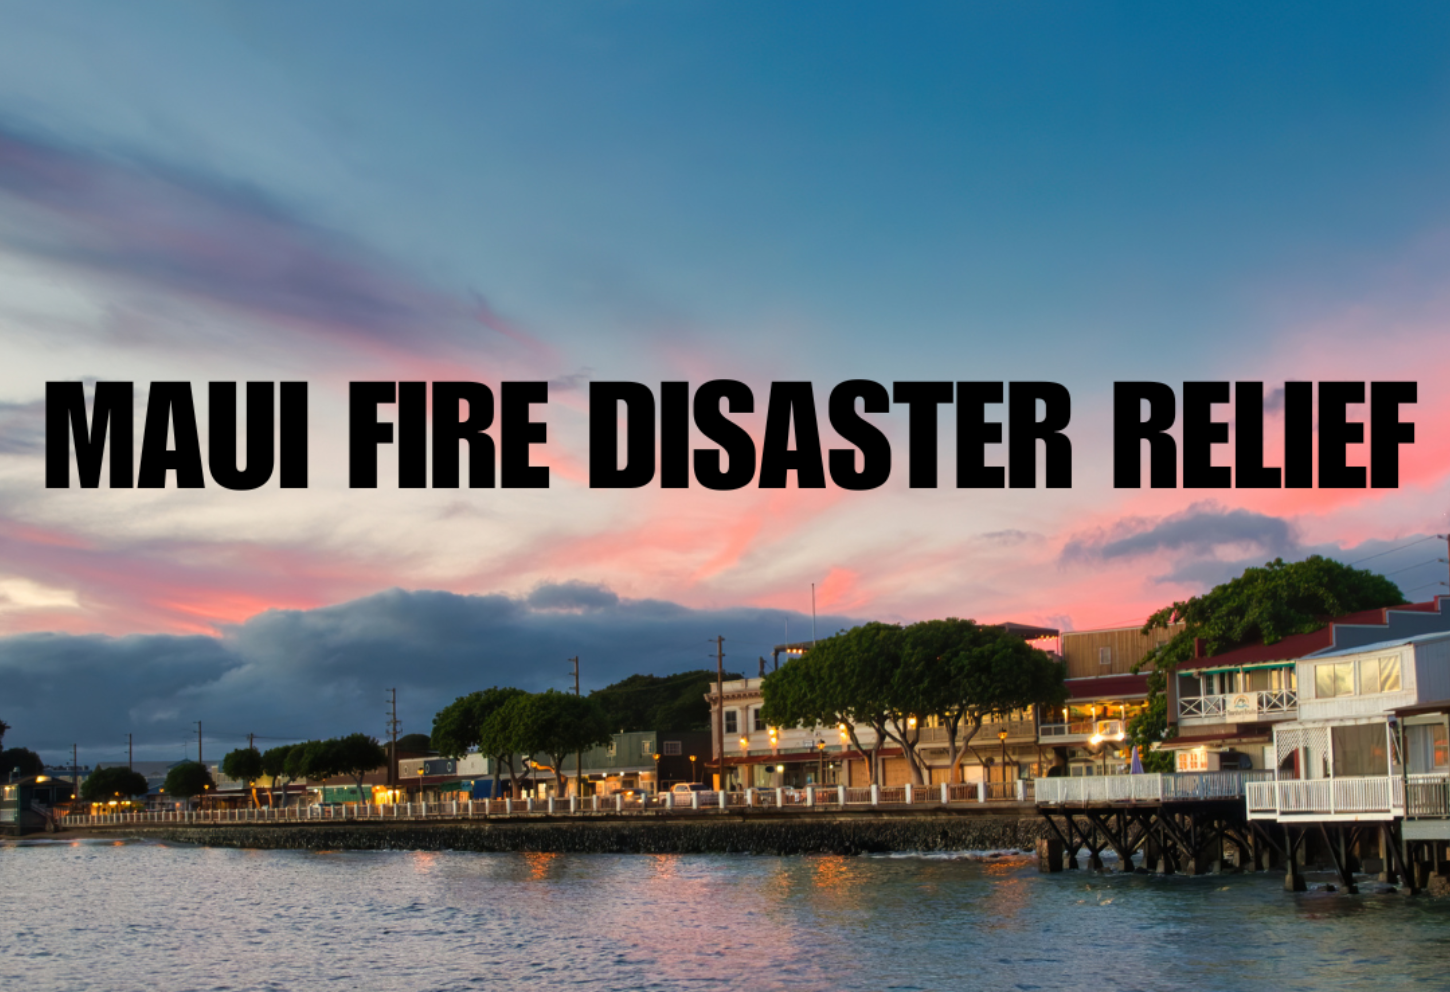 Maui Fire Disaster Relief graphic